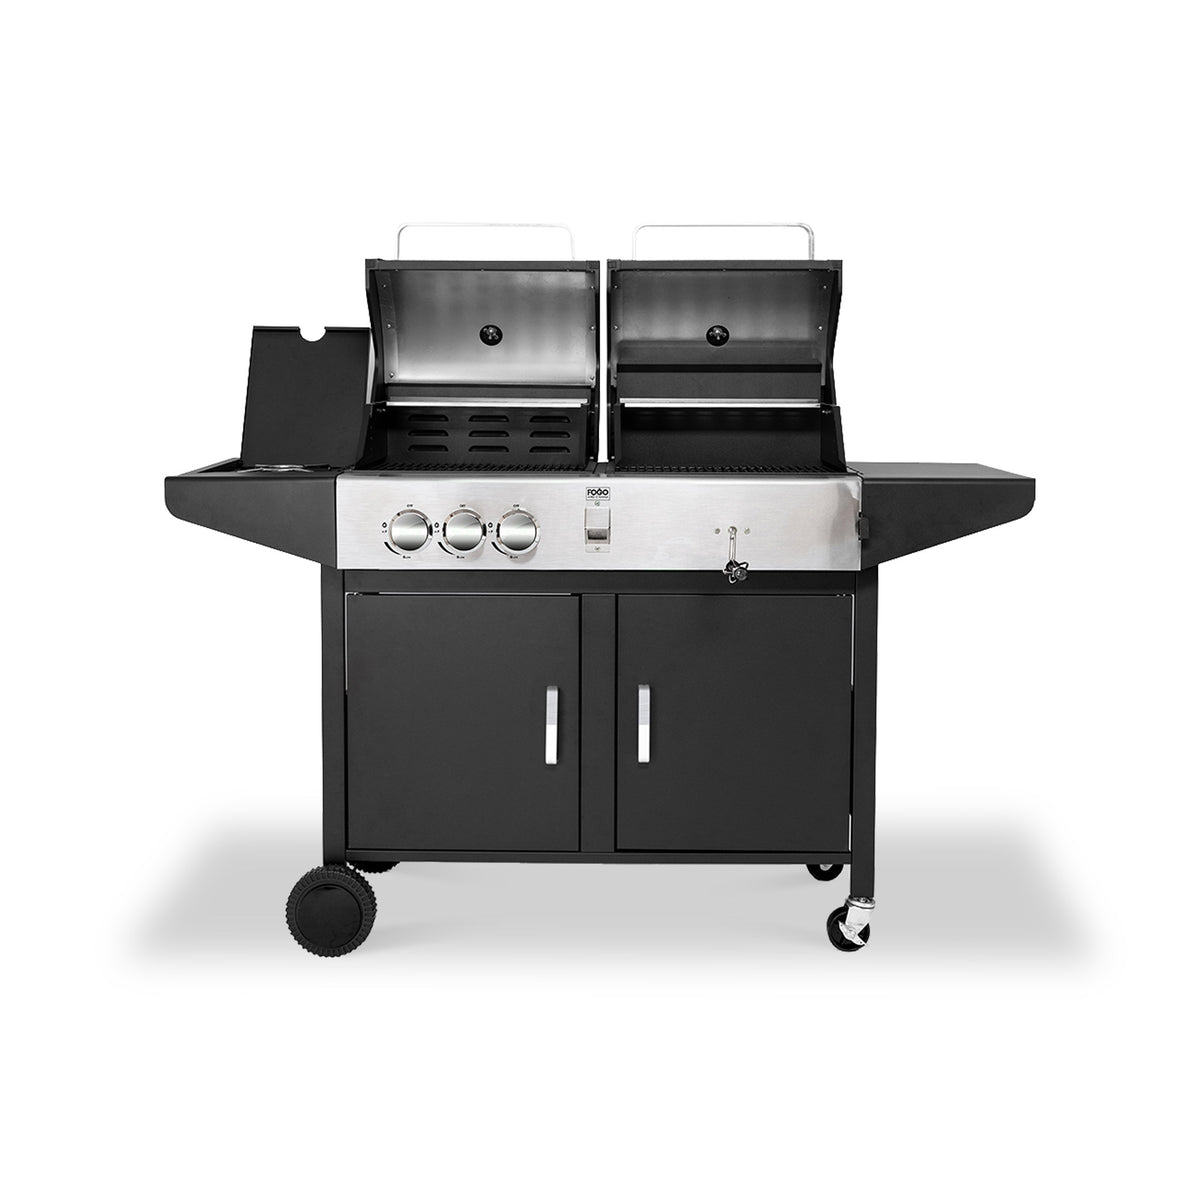 Roquito Dual Fuel BBQ - Charcoal and Gas Barbeque